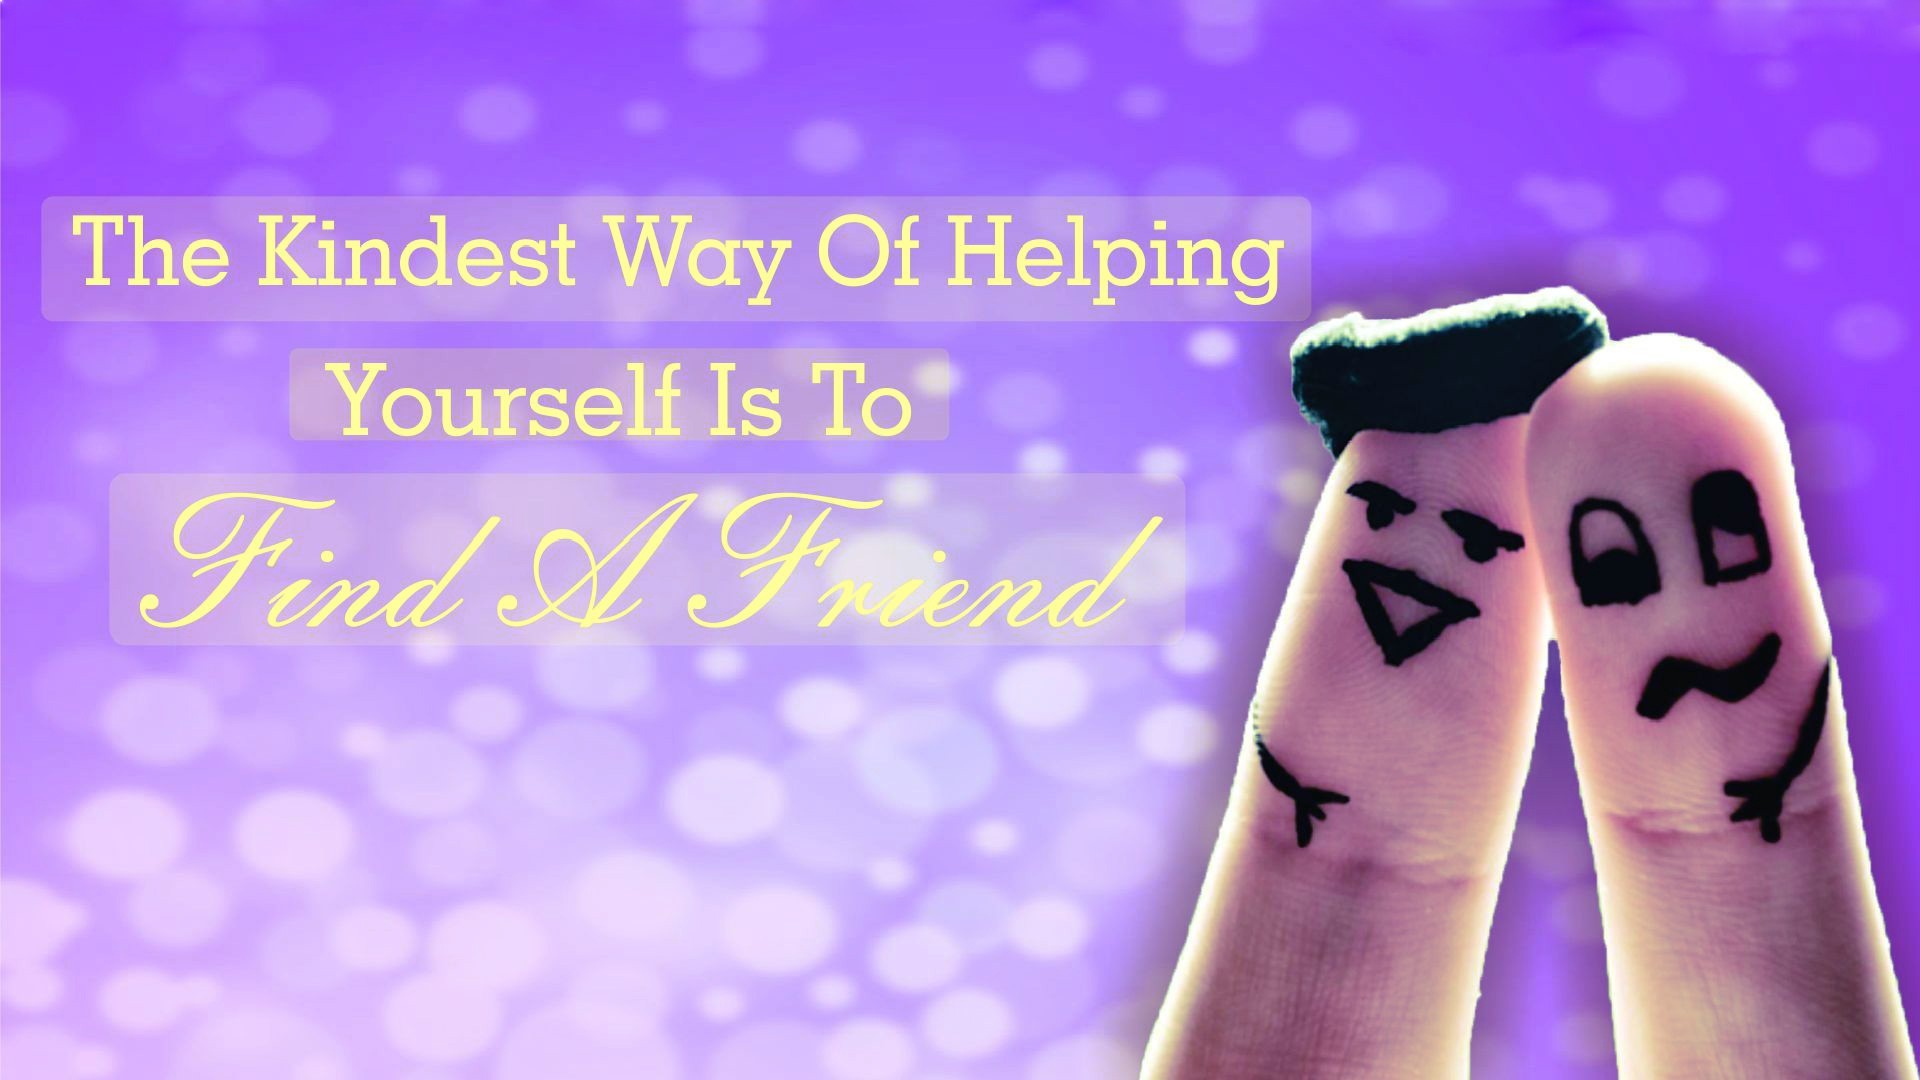 Beautiful Friendship Wallpapers With Quotes - HD Wallpaper 